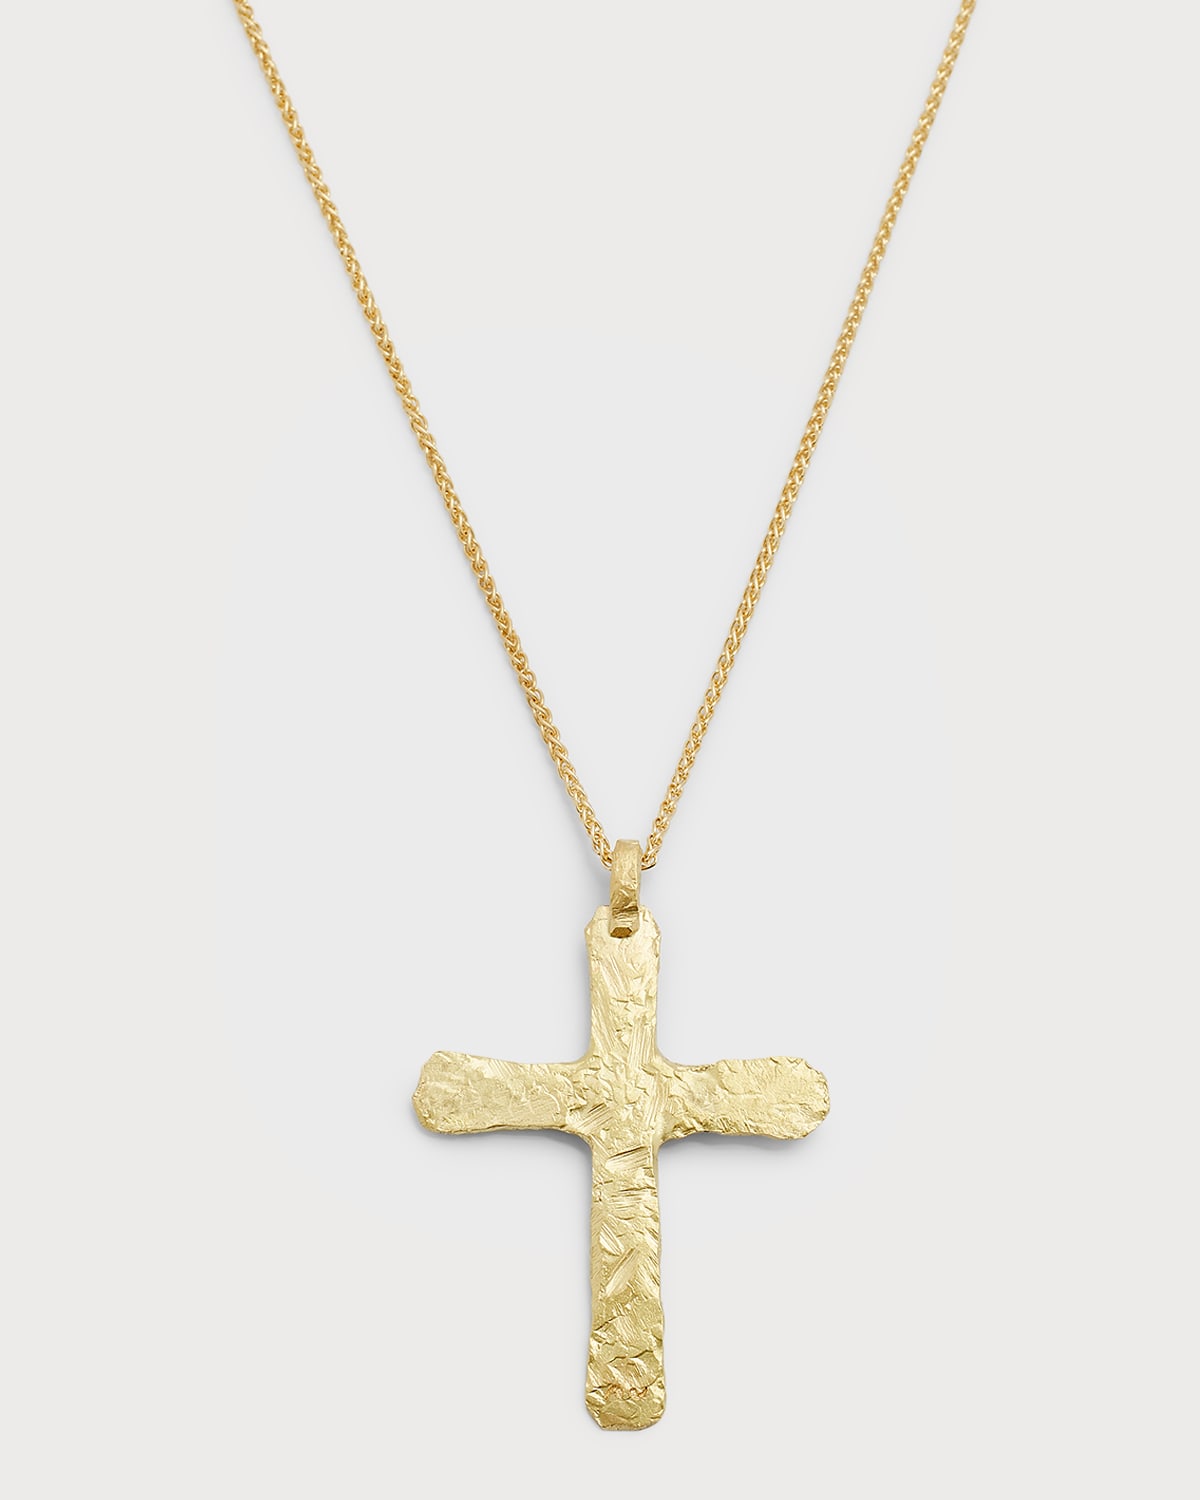 Marco Dal Maso 18K Yellow Gold Cross Pendant Link Chain Necklace, 24"